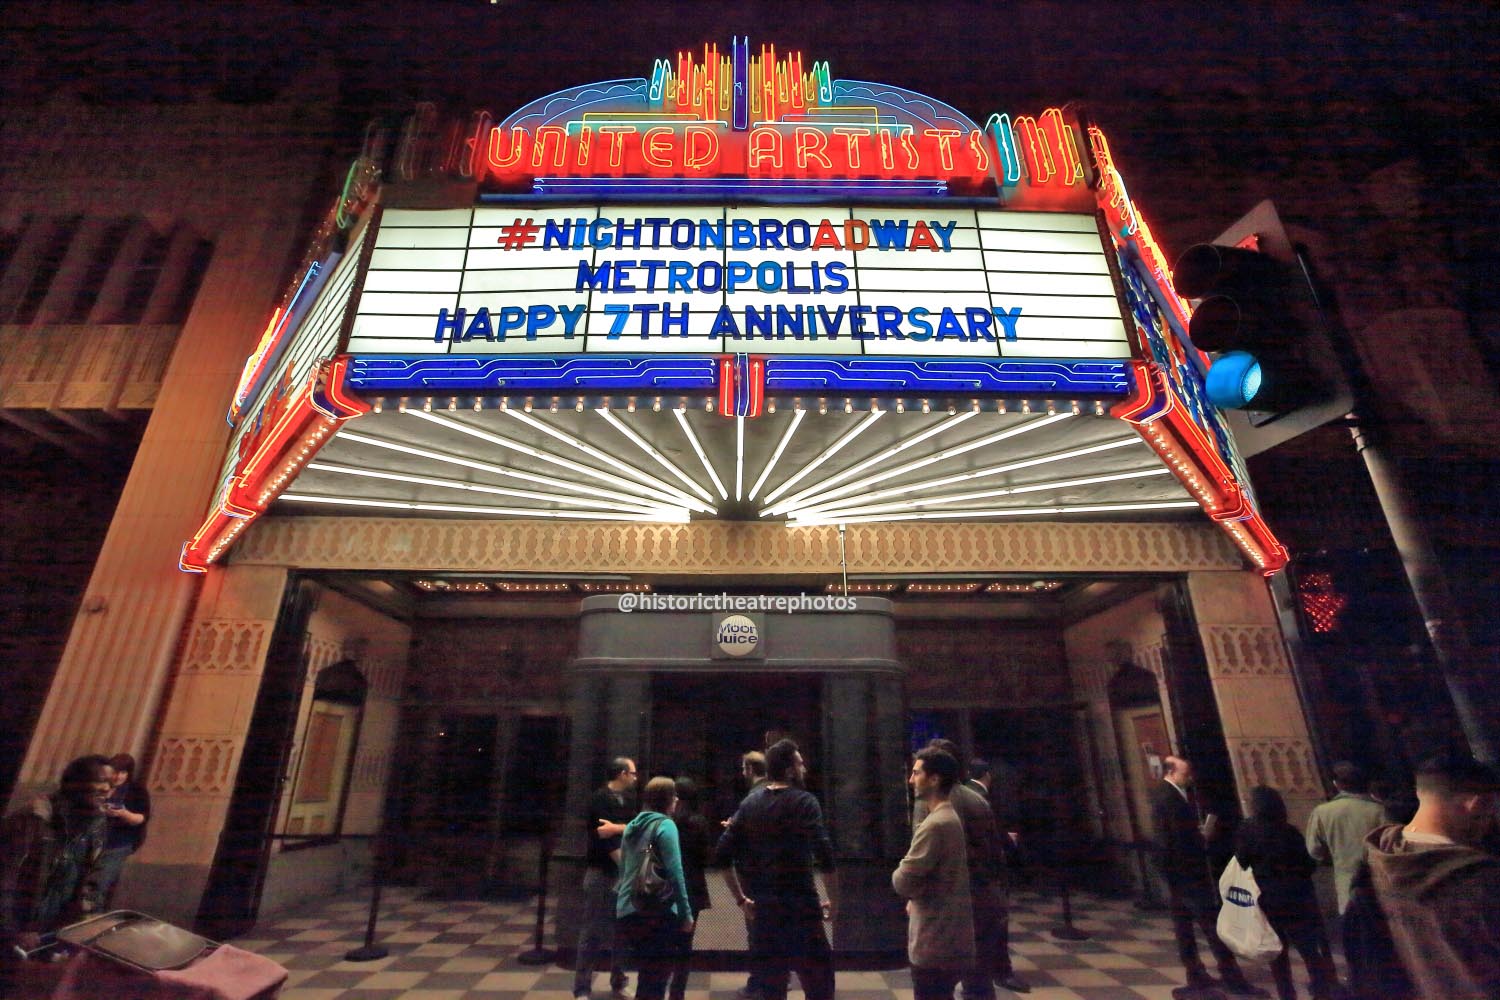 The United Theater on Broadway, Los Angeles: <i>Night On Broadway</i> 2015